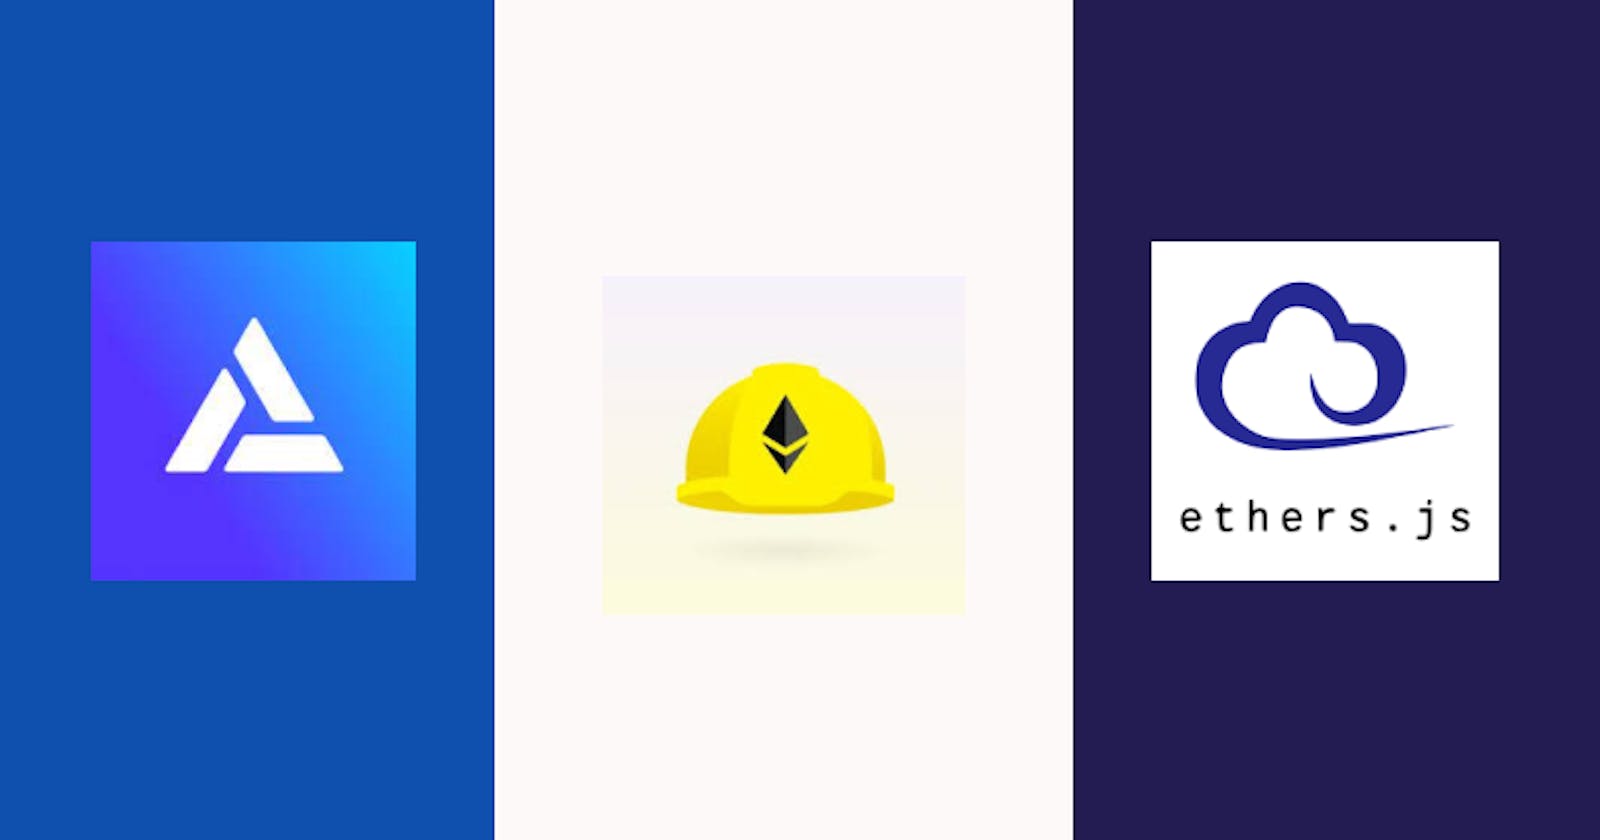 Build and deploy a library member registration book on the Ethereum Blockchain using Alchemy - Hardhat & Solidity